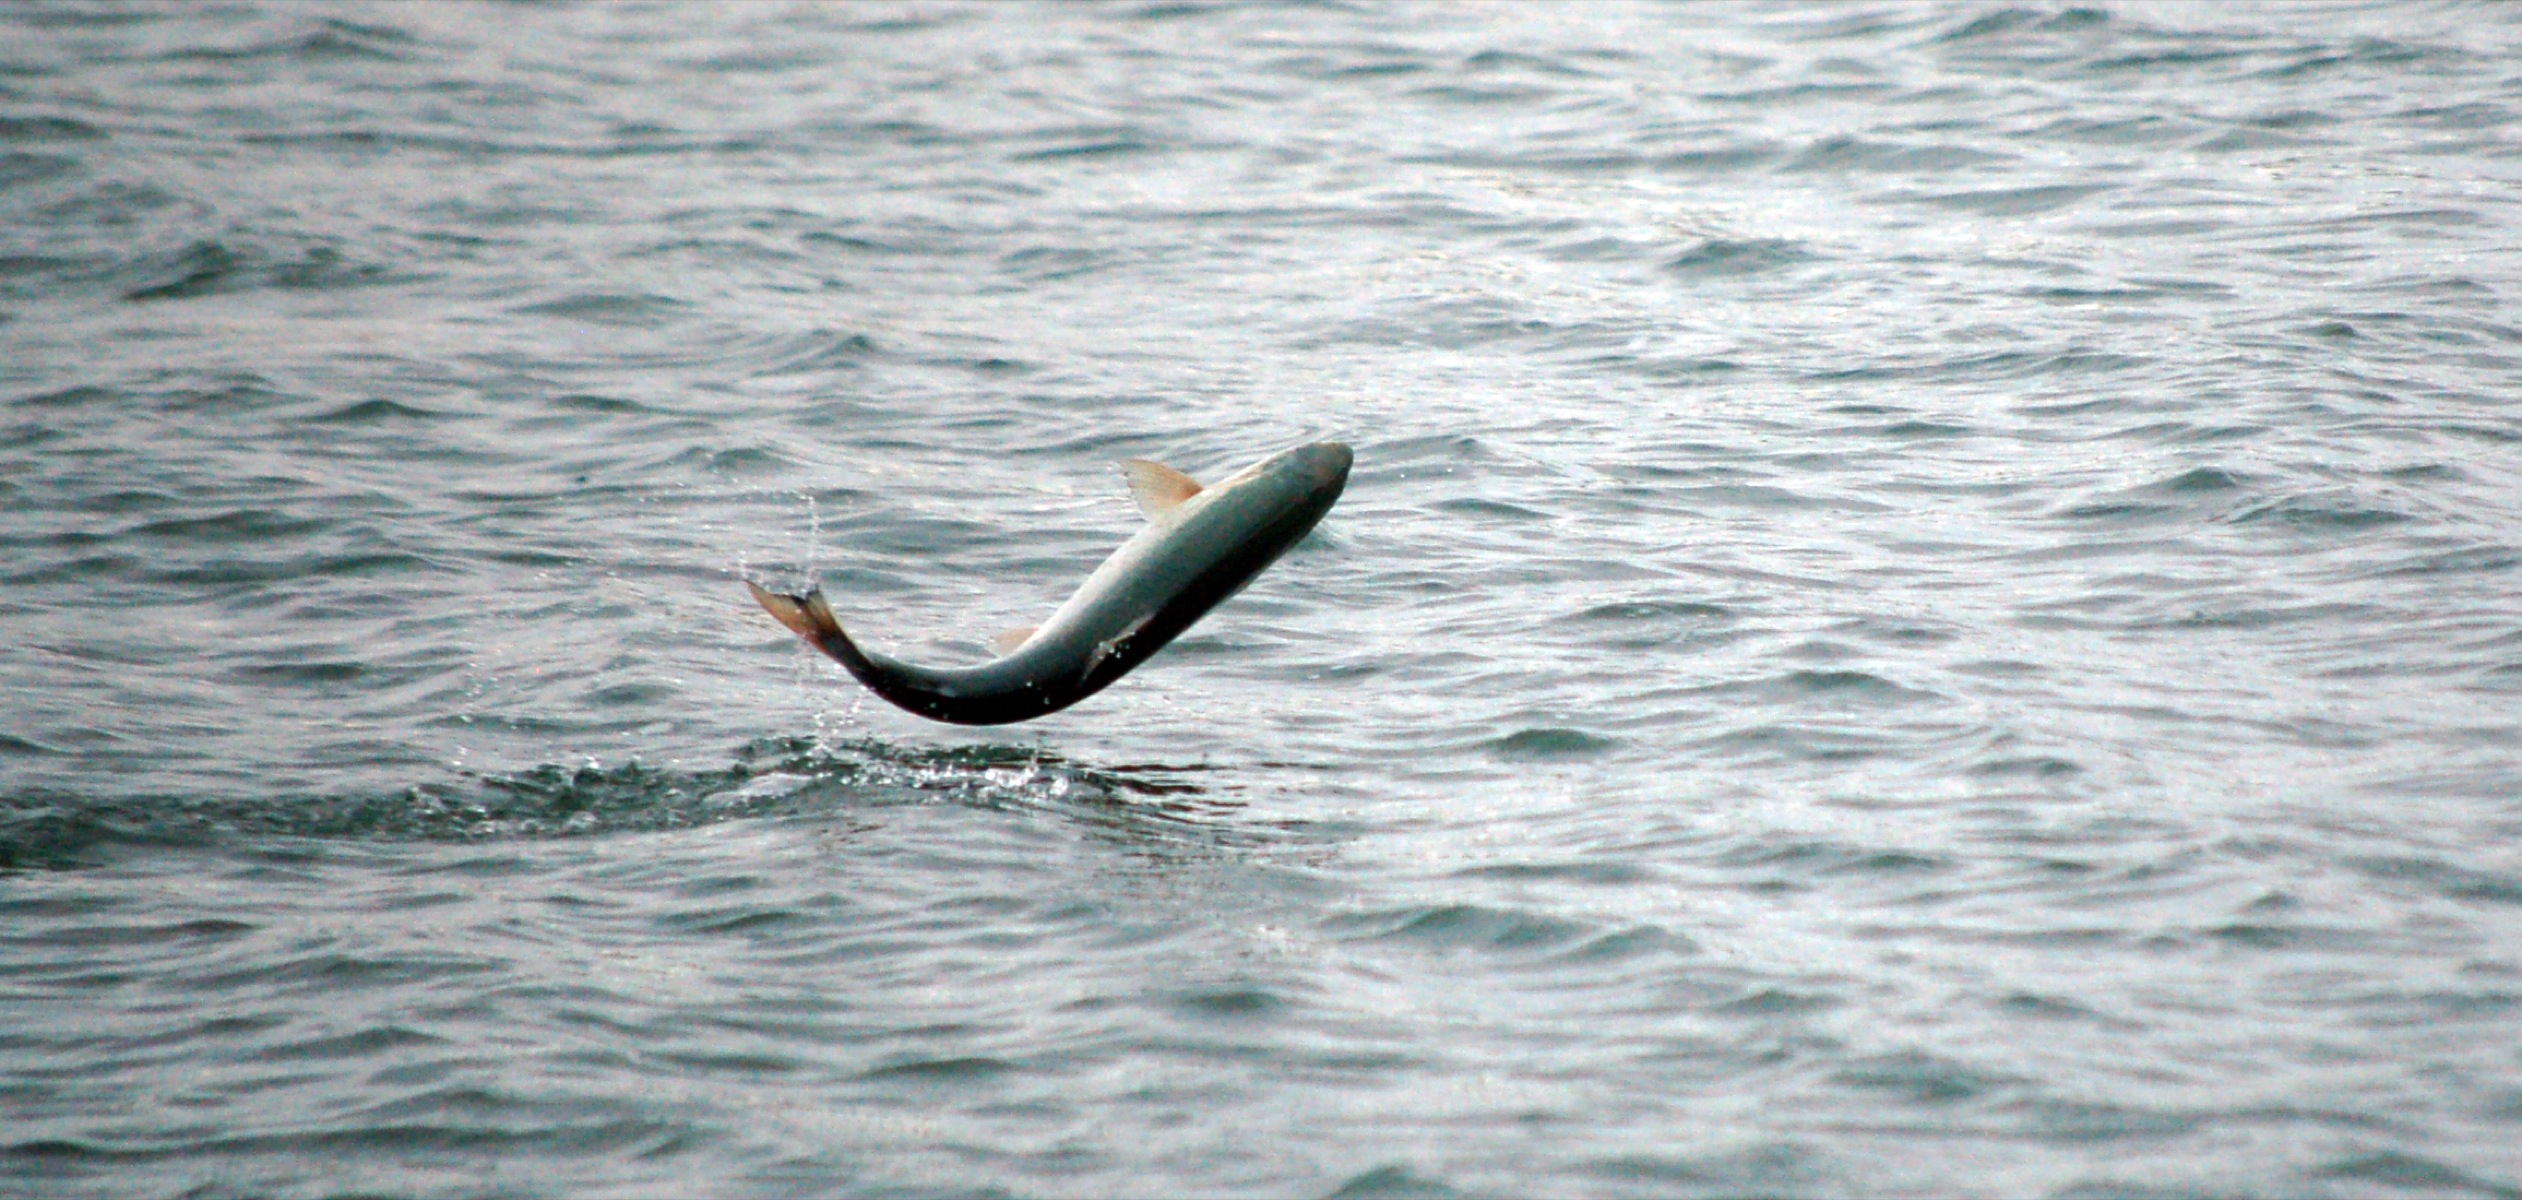 A silver salmon jumps on Thursday at the Nick Dudiak Fishing Lagoon on the Homer Spit.-Photo by Michael Armstrong, Homer News